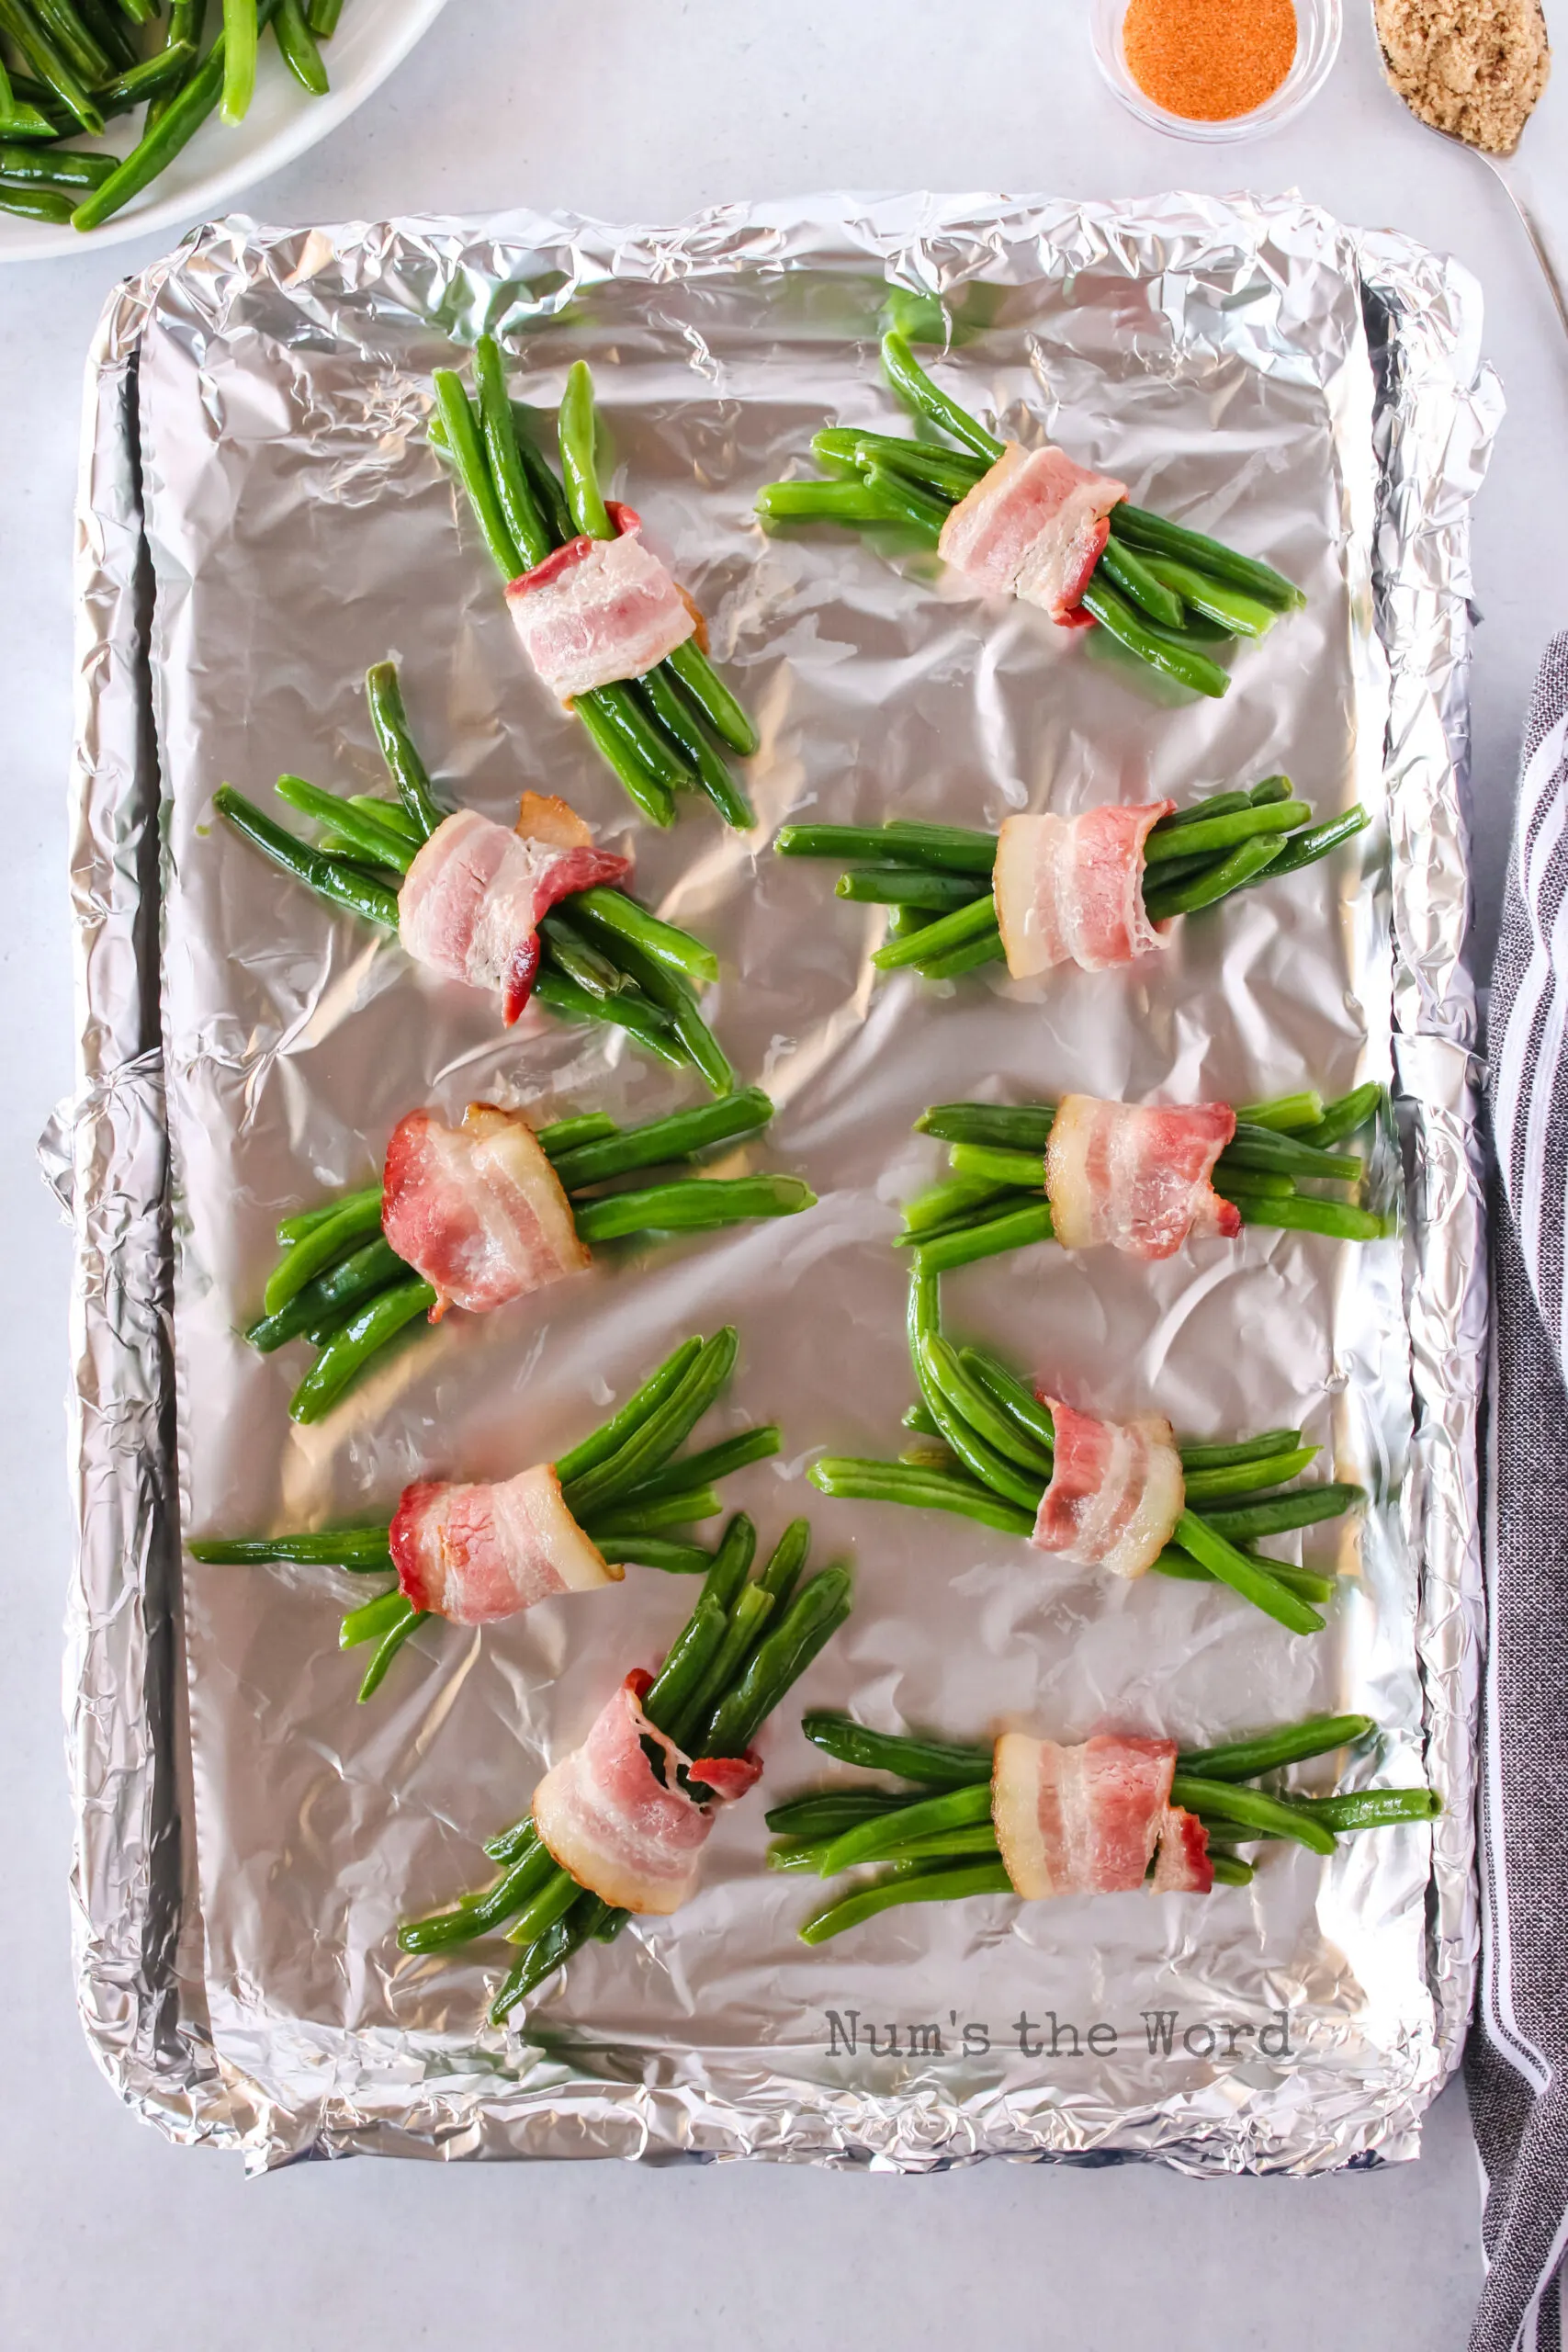 several green beans wrapped in bacon